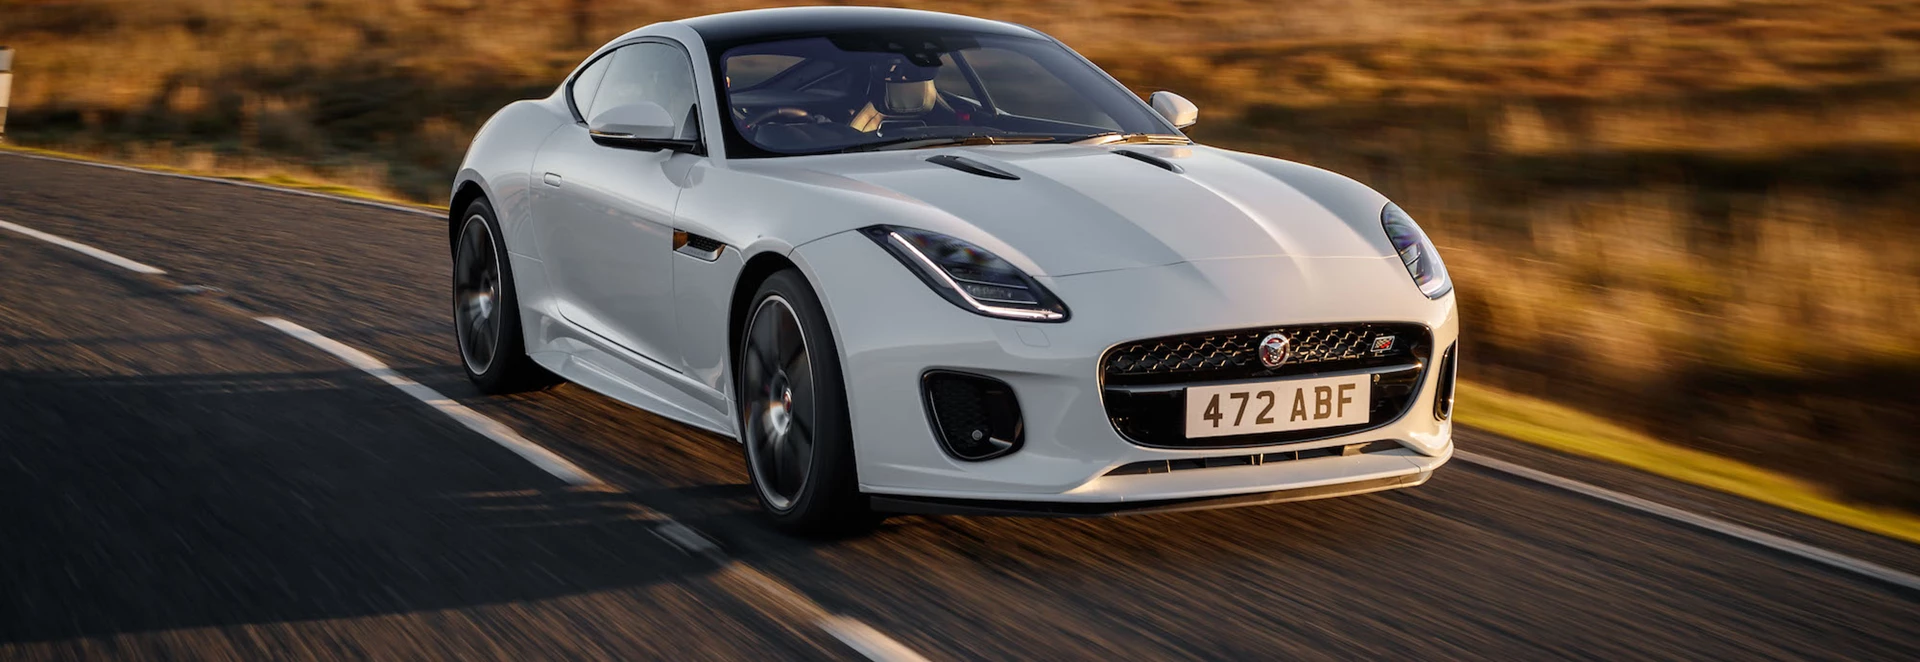 New Jaguar F-Type Chequered Flag special edition revealed